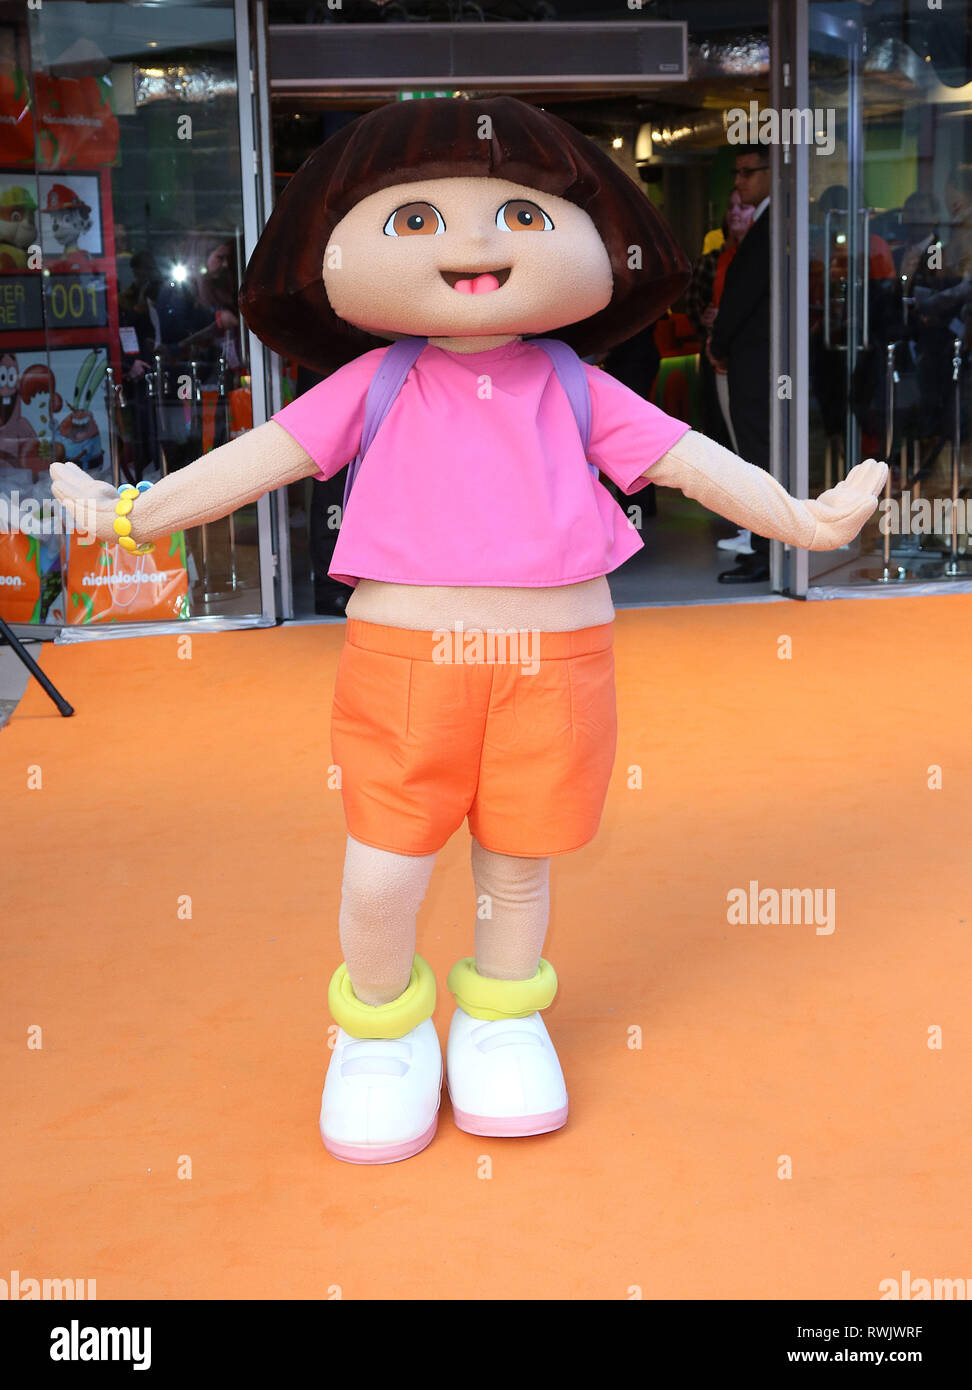 May 29, 2015 - London, England, UK - Nickelodeon Flagship Store Launch, Leicester Square - Orange Carpet Arrivals Photo Shows: Dora The Explorer Stock Photo